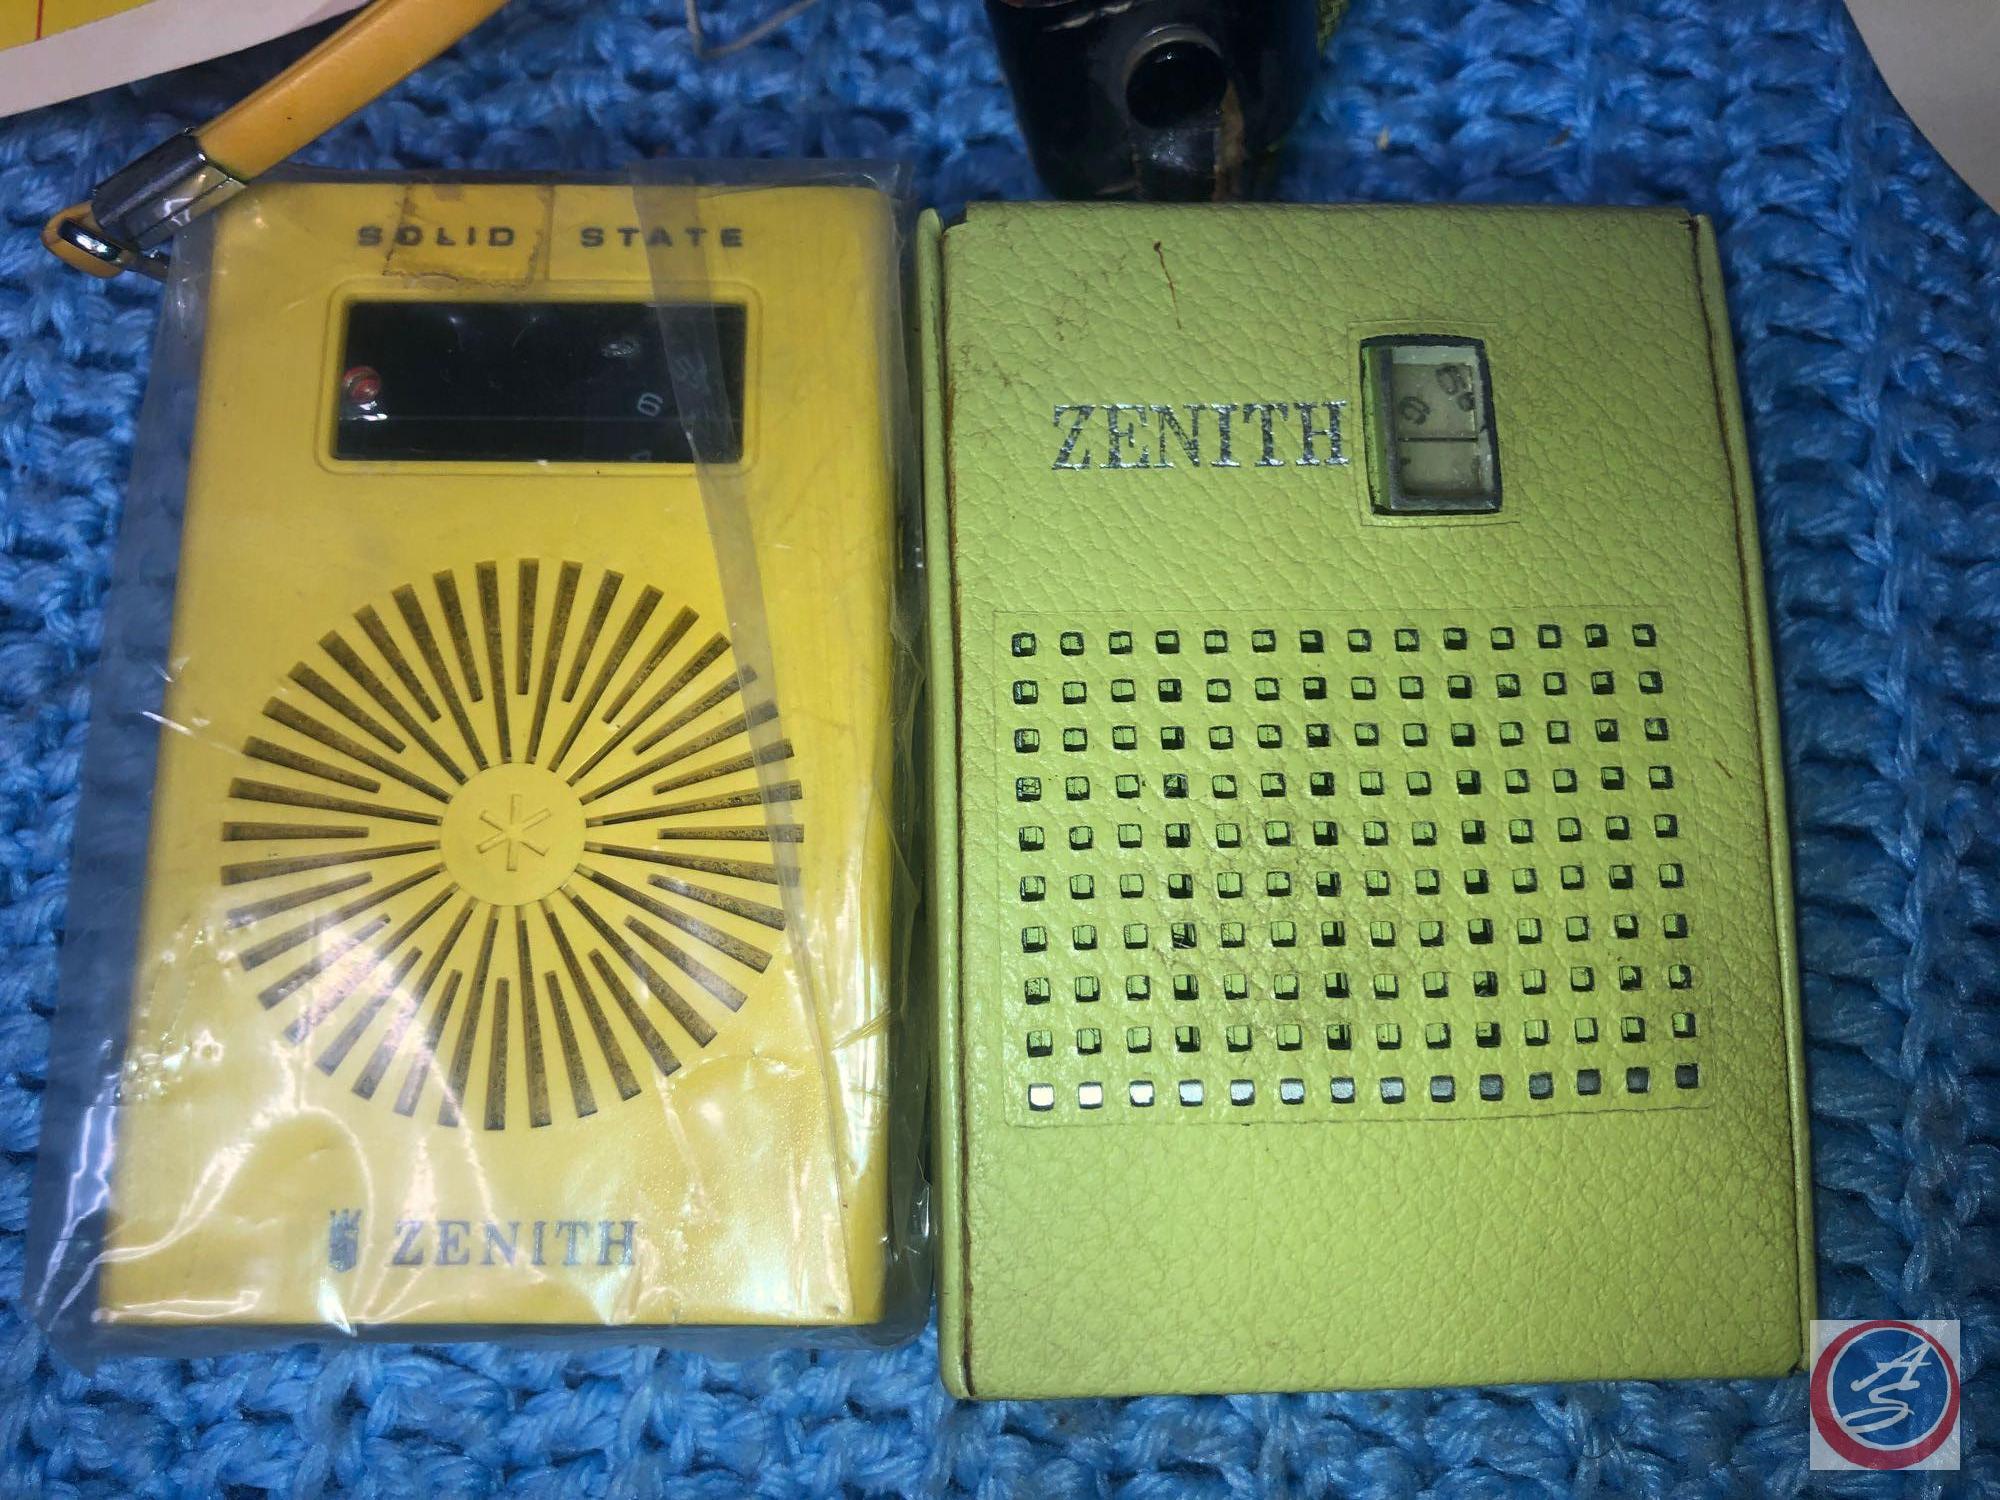 (2) Zenith Solid State AM Transistor Hand Held Radios, One Yellow One Green [[ONLY ONE WITH CASE]]